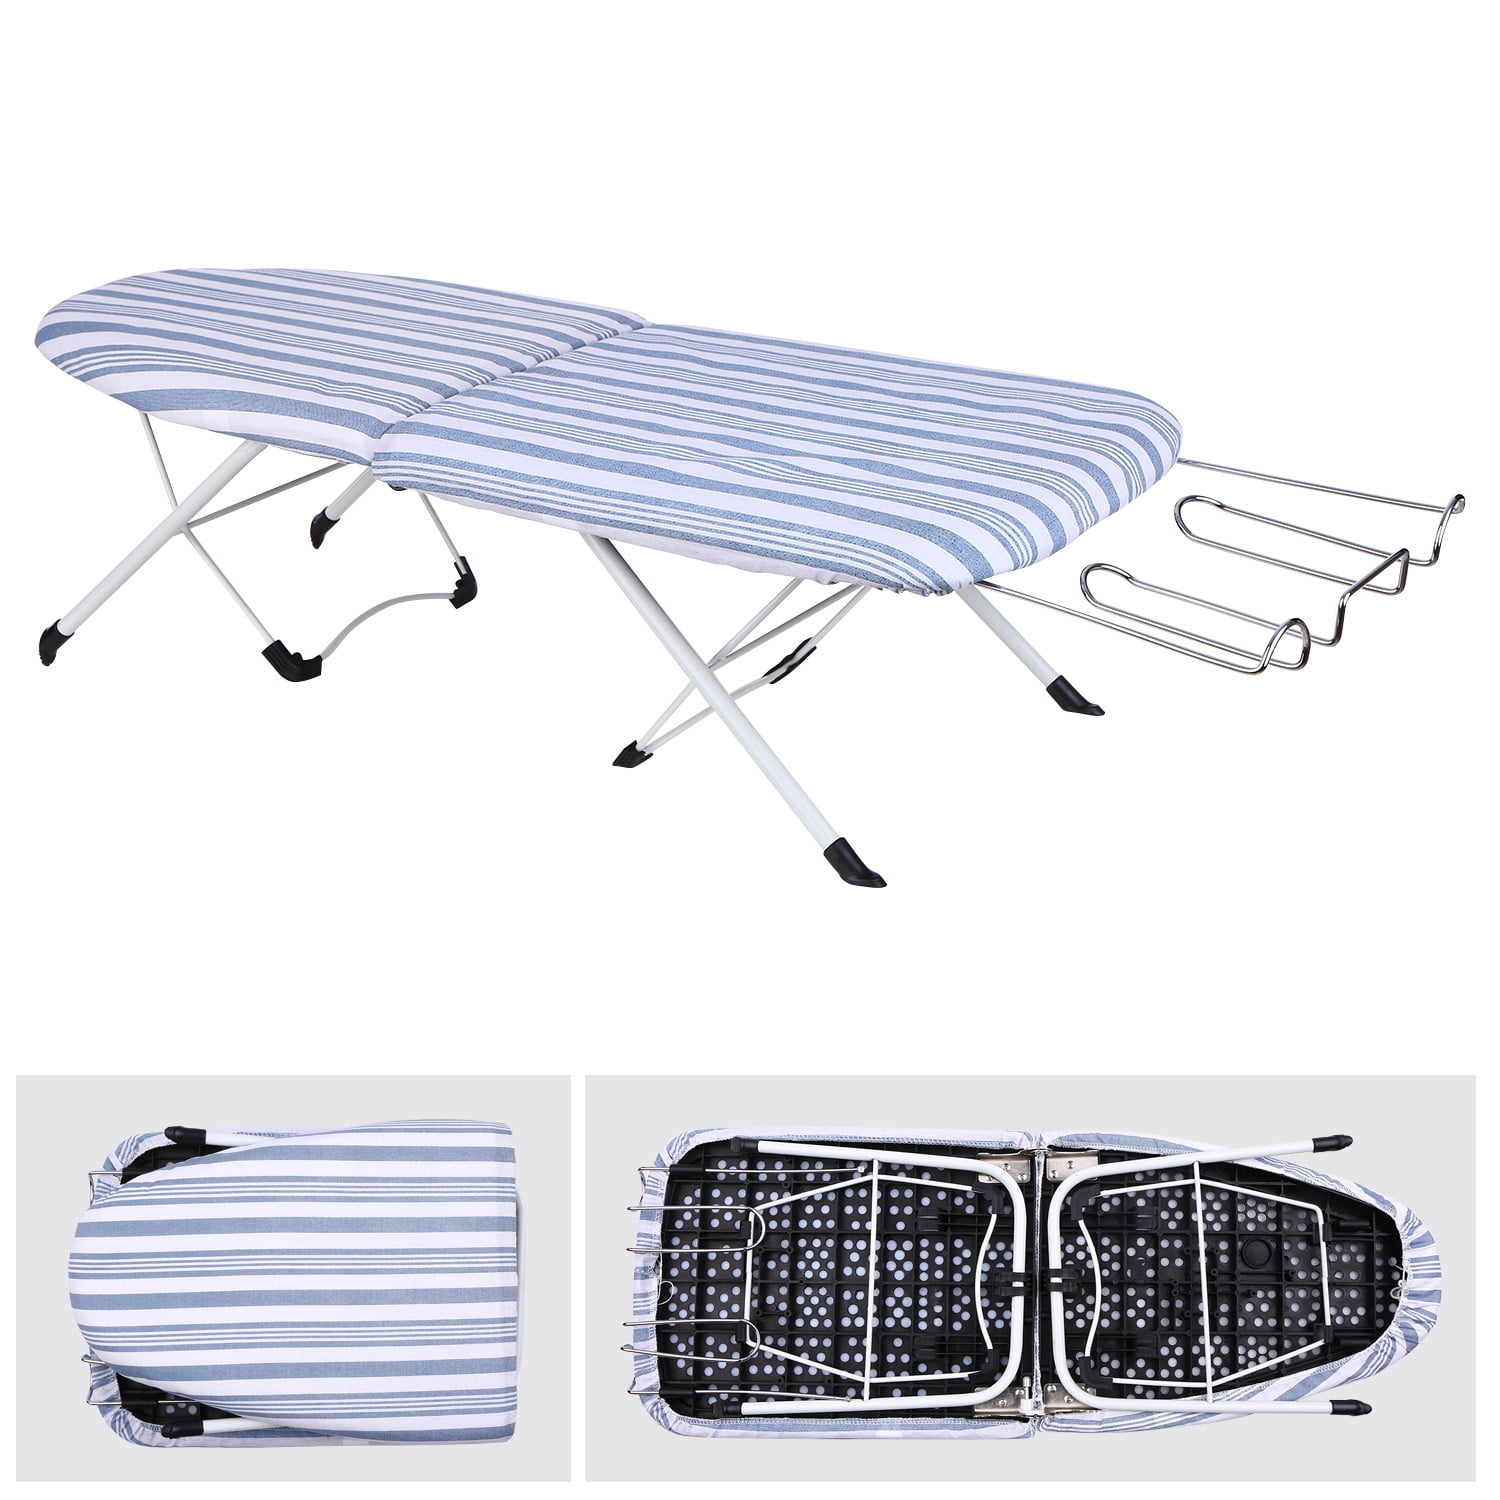 Tabletop Ironing Board with Retractable Iron Rest Small Table Compact Portable.. 